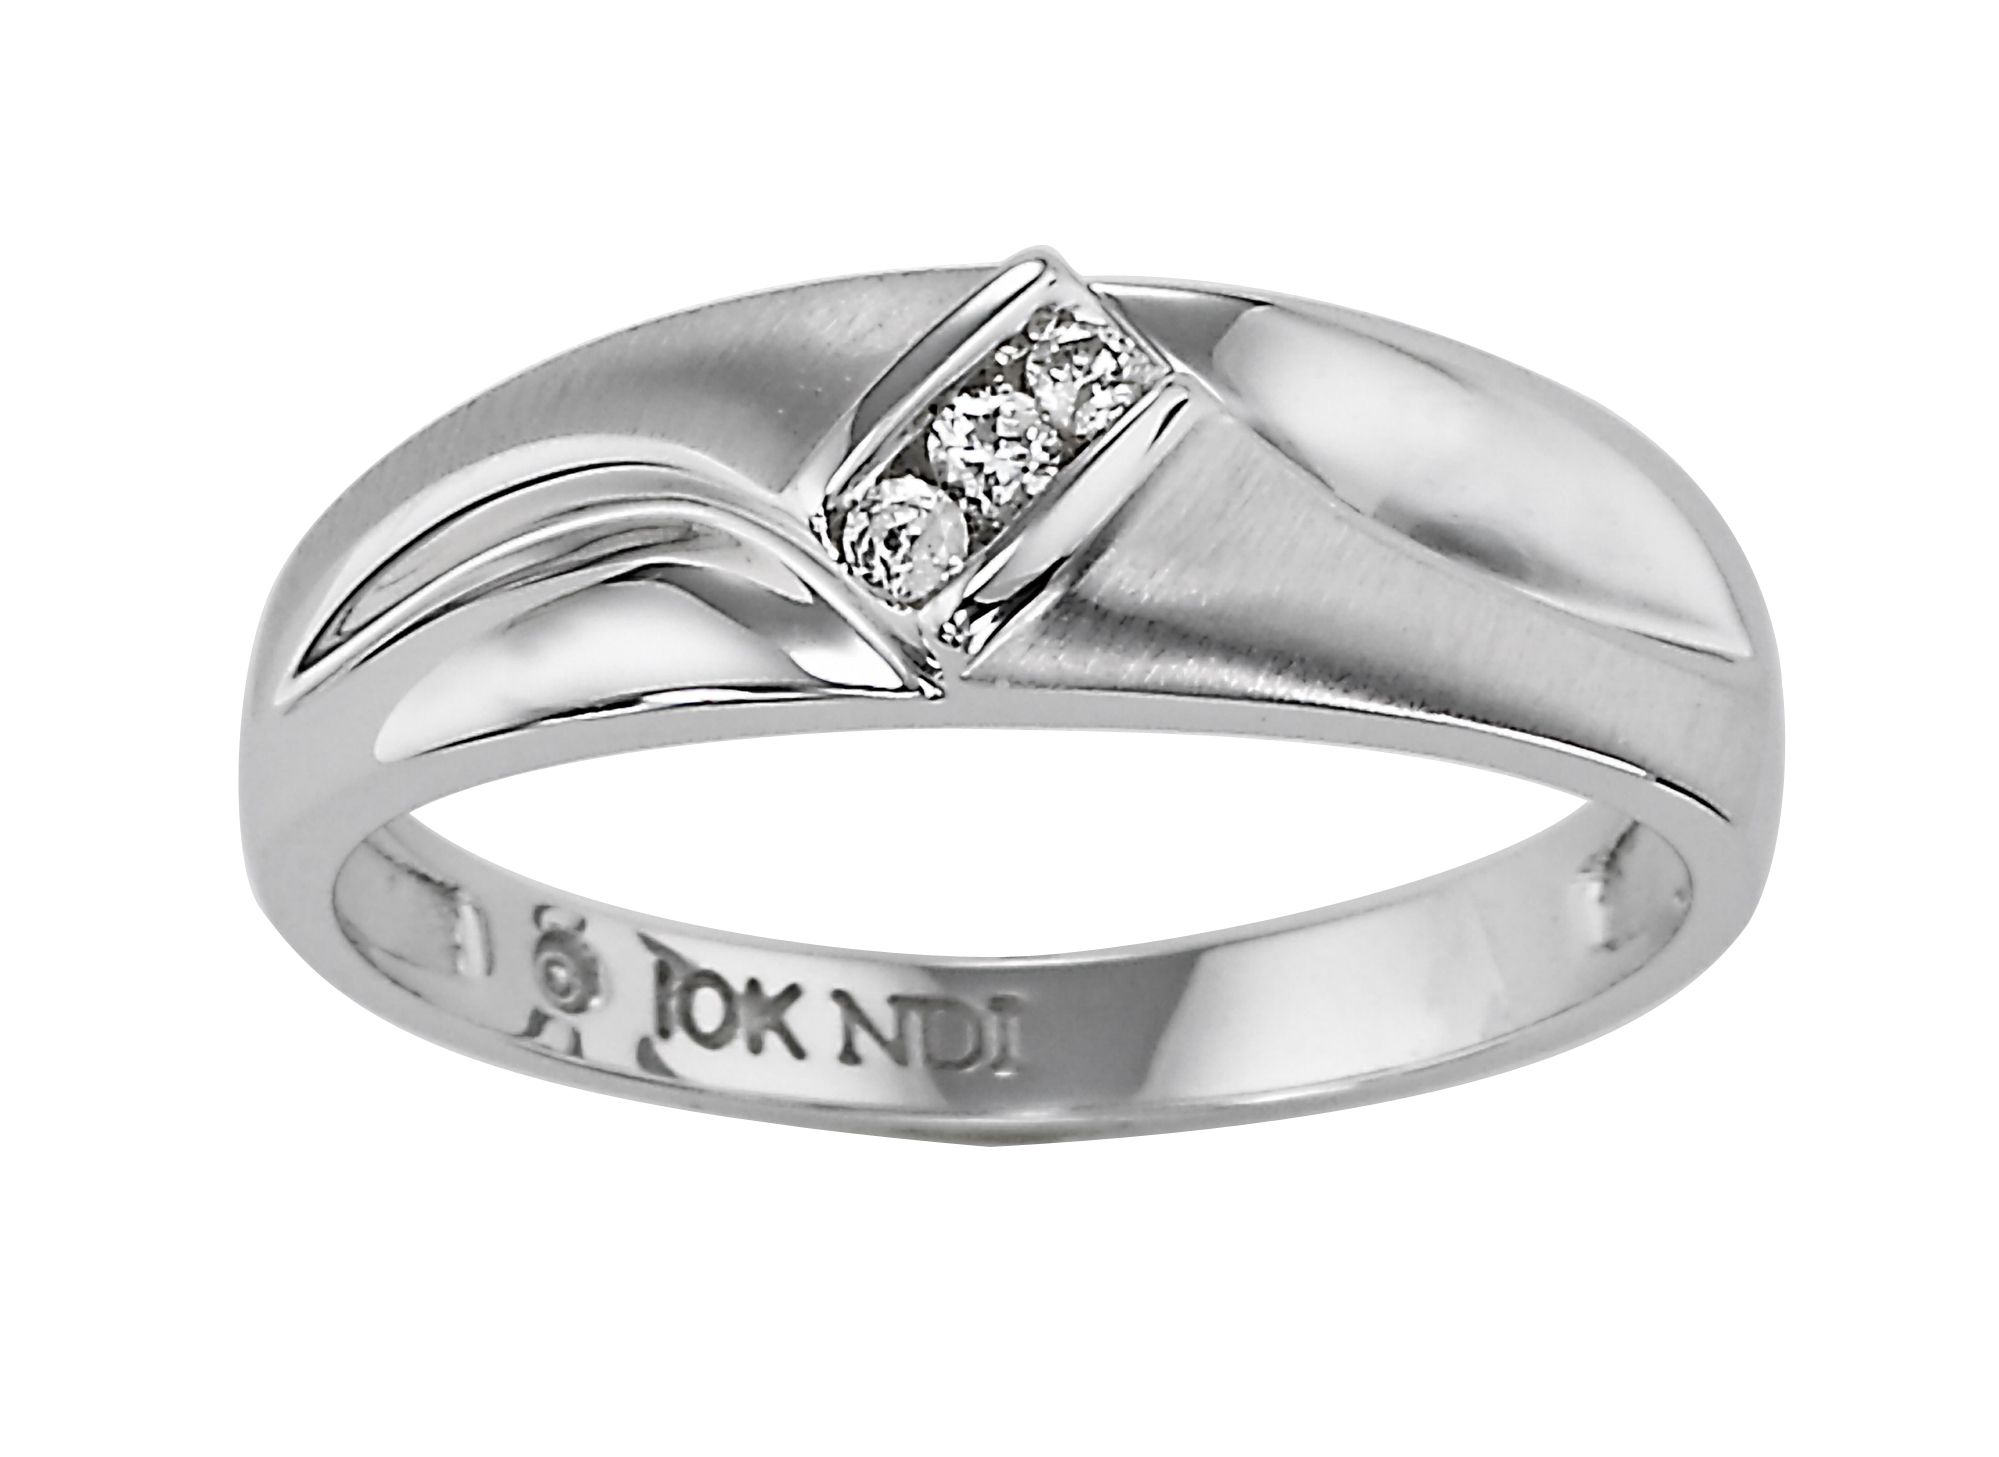 10k White Gold Mens Wedding Ring with Diamond Accents